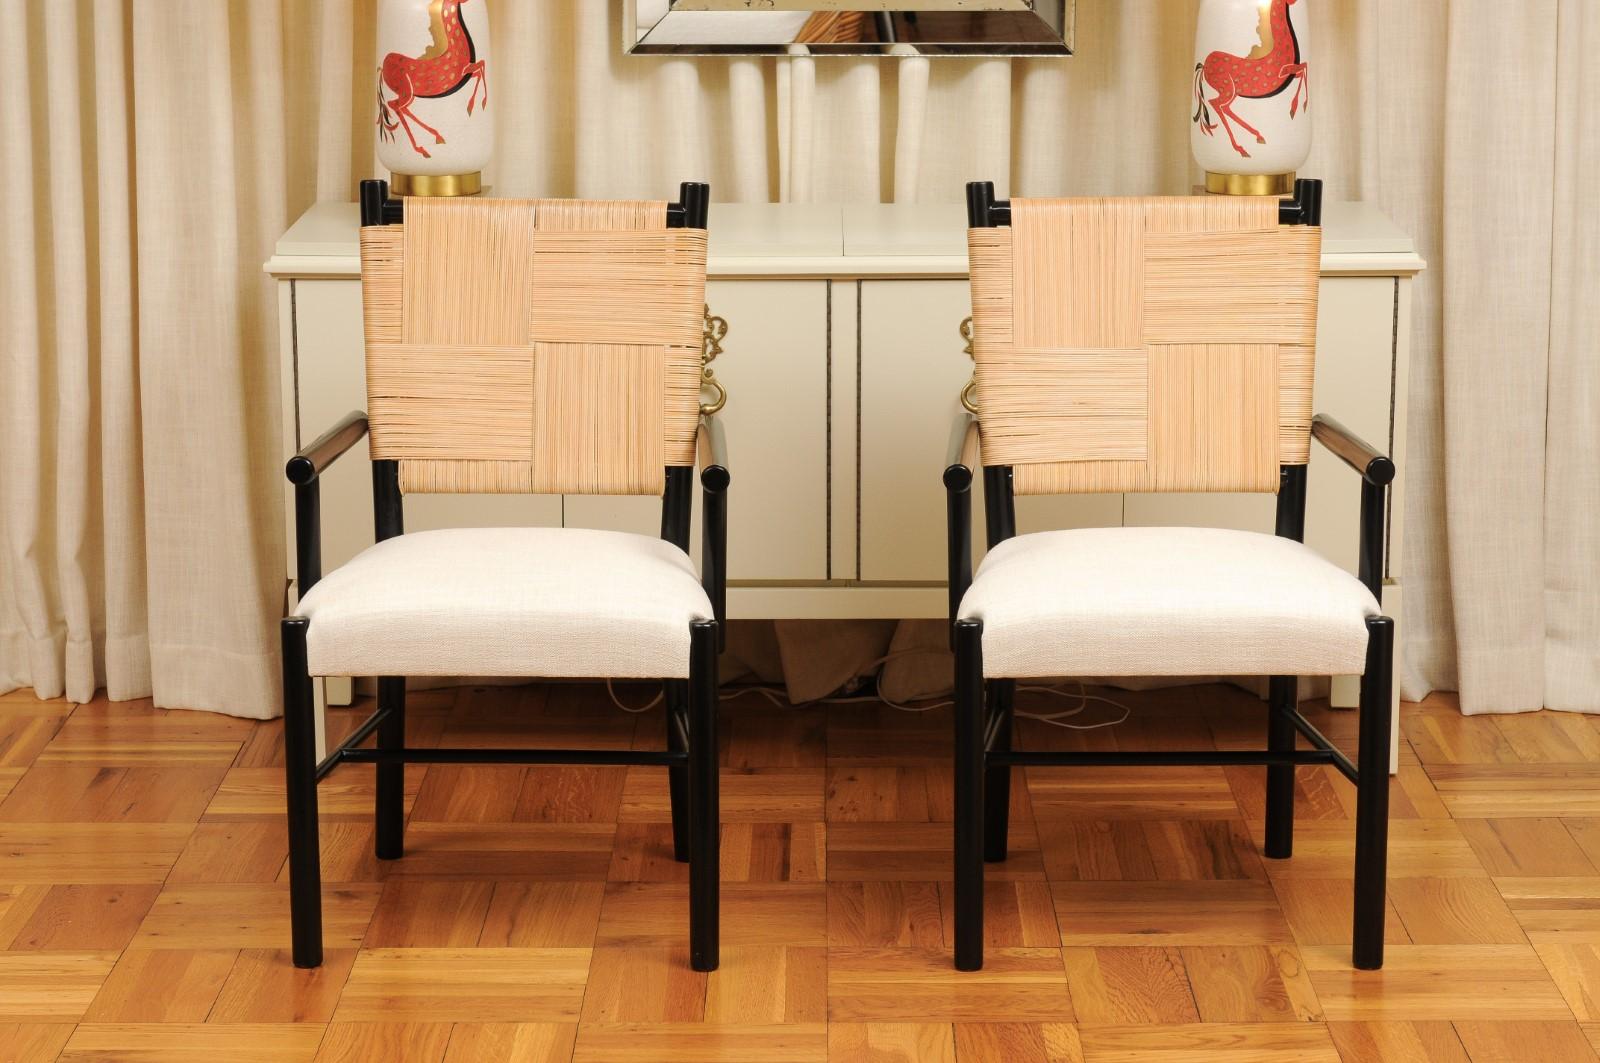 All Arms- Sublime Set of 14 Cane Back Dining Chairs by John Hutton for Donghia For Sale 1